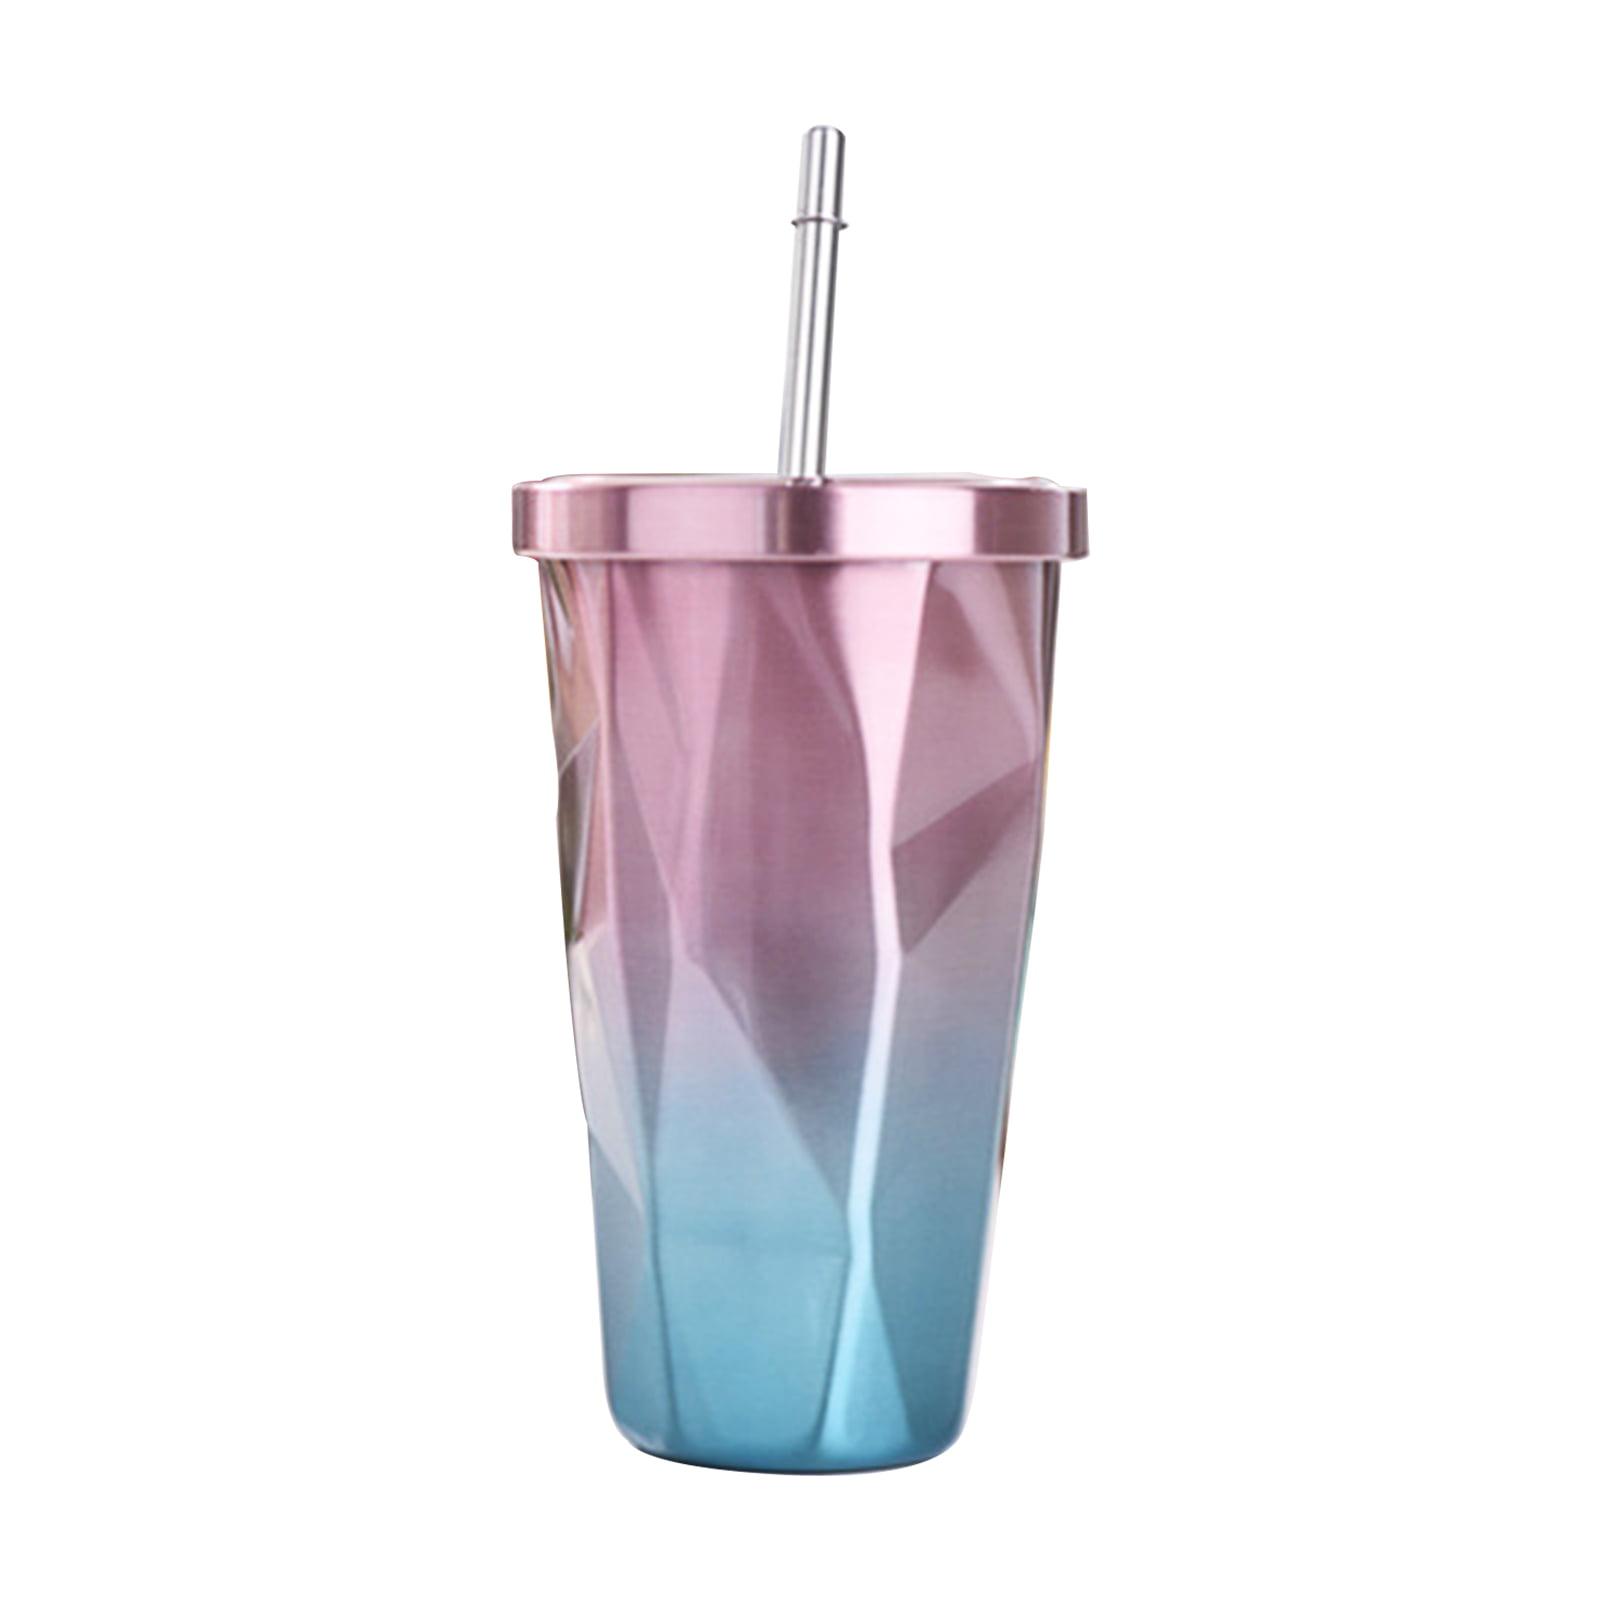 Details about   Acrylic Tumbler 4 Cups 16 Ounce  Cups Soda Water Tea  w/Cover & Straw & Holder 